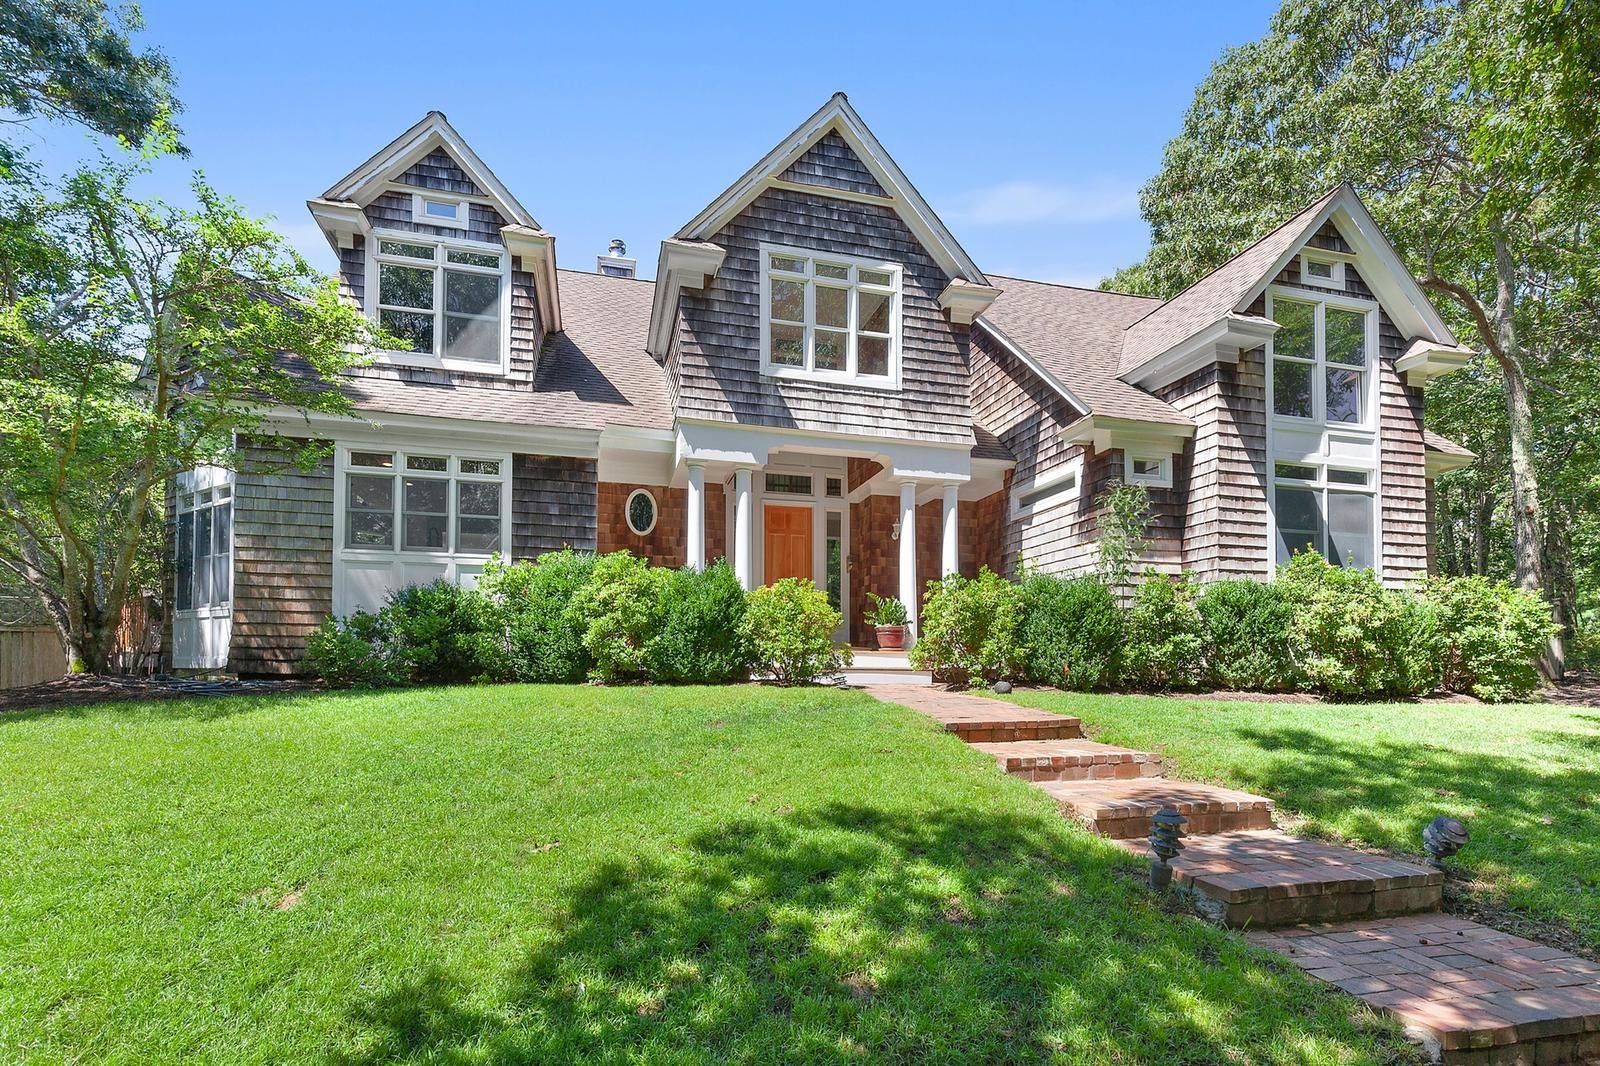 EAST HAMPTON TRADITIONAL ON 5.5 acres with TENNIS & BBALL COURTS